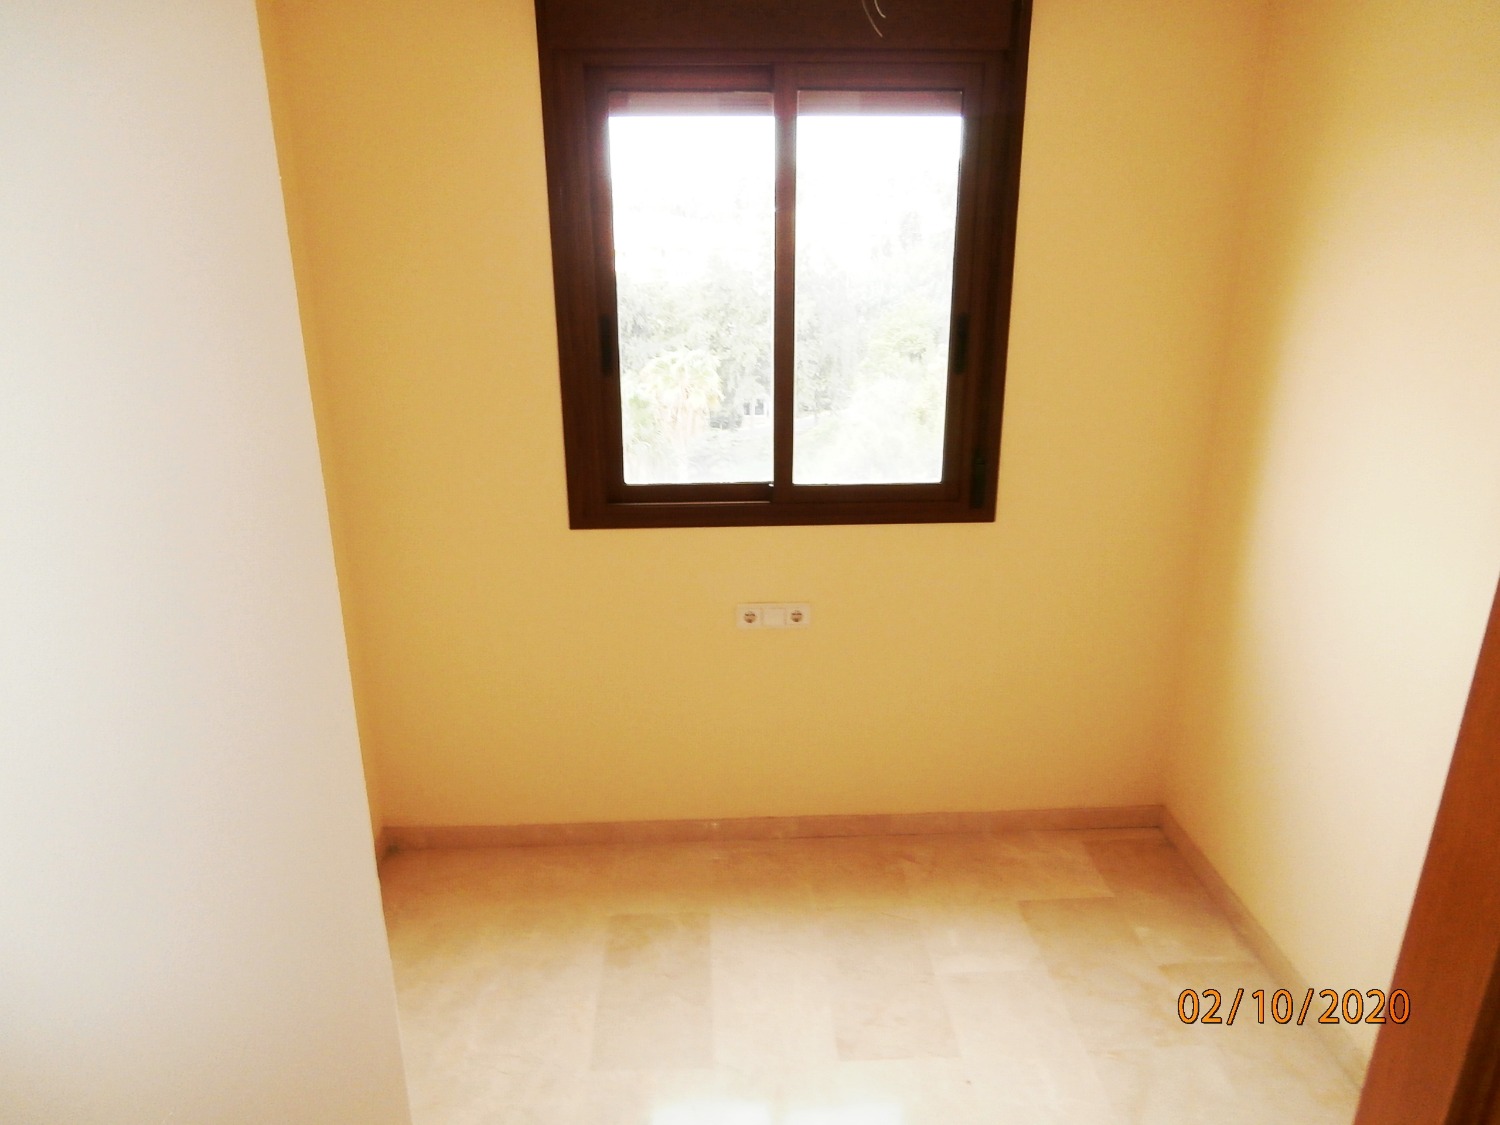 Exclusive brand new independent house in the best area of the Golf of Torrequebrada.